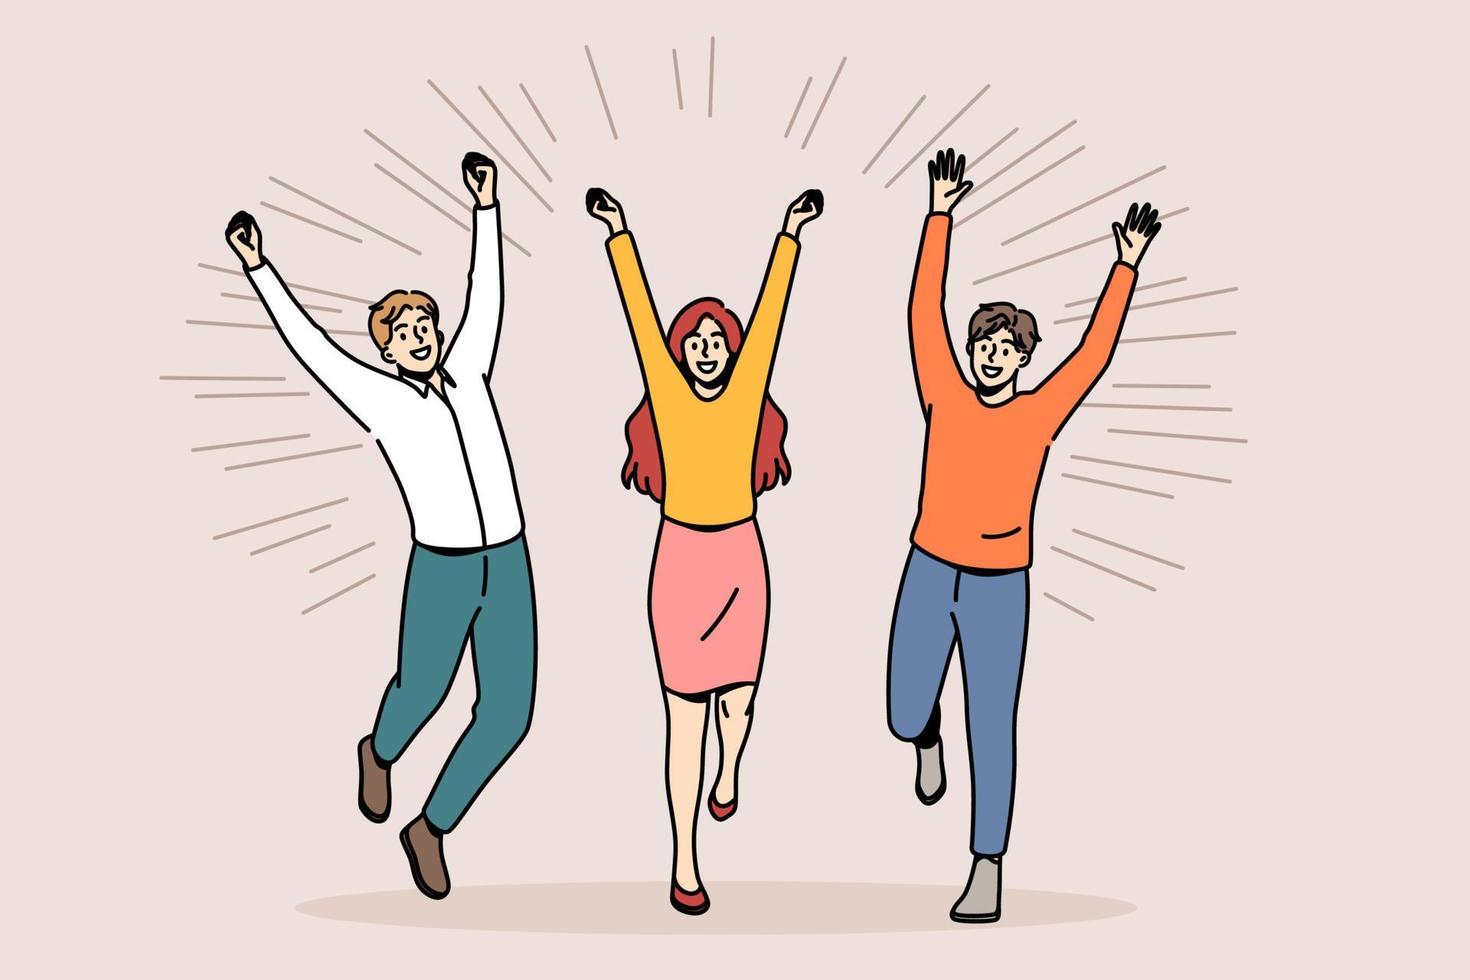 Business team success celebrating concept. Group of young happy smiling people business partners jumping with raised hands feeling excited vector illustration